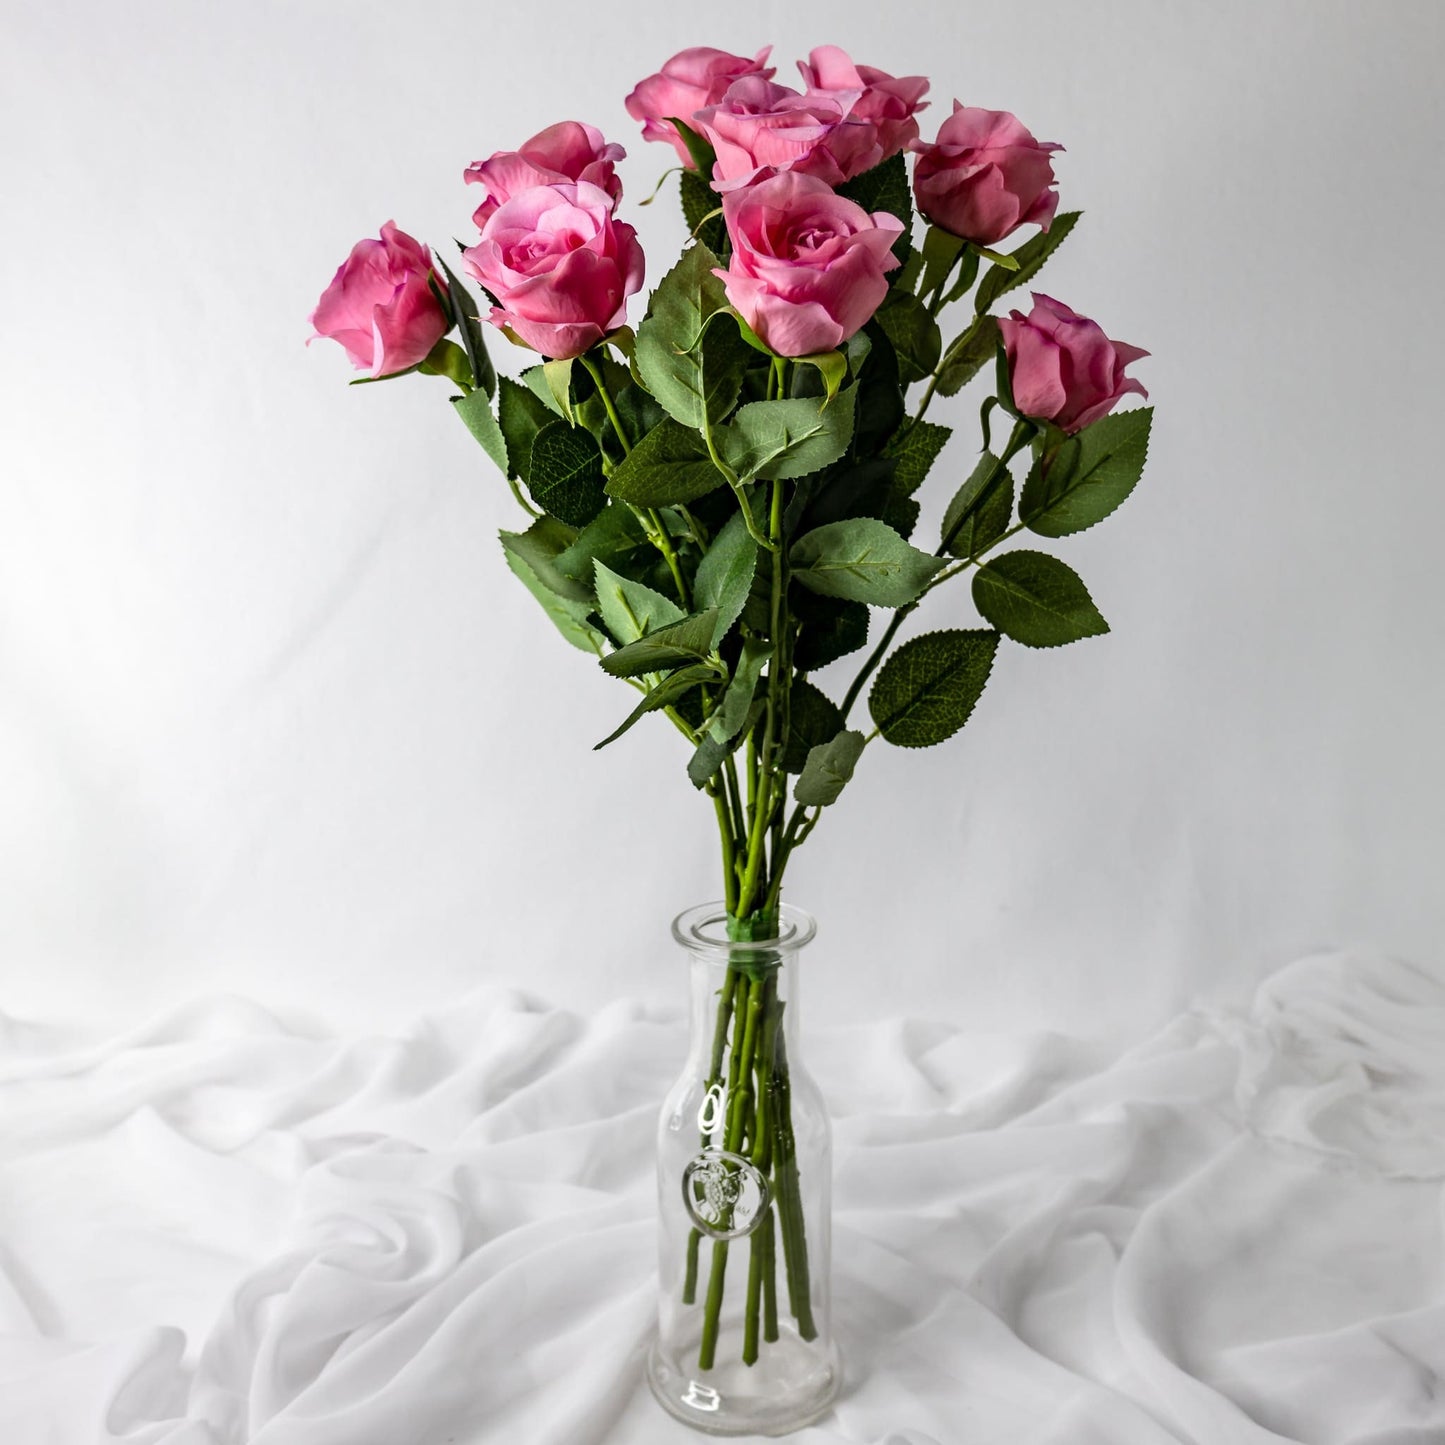 artificial Pink Real Touch Half Bloom Roses closer look in glass vase